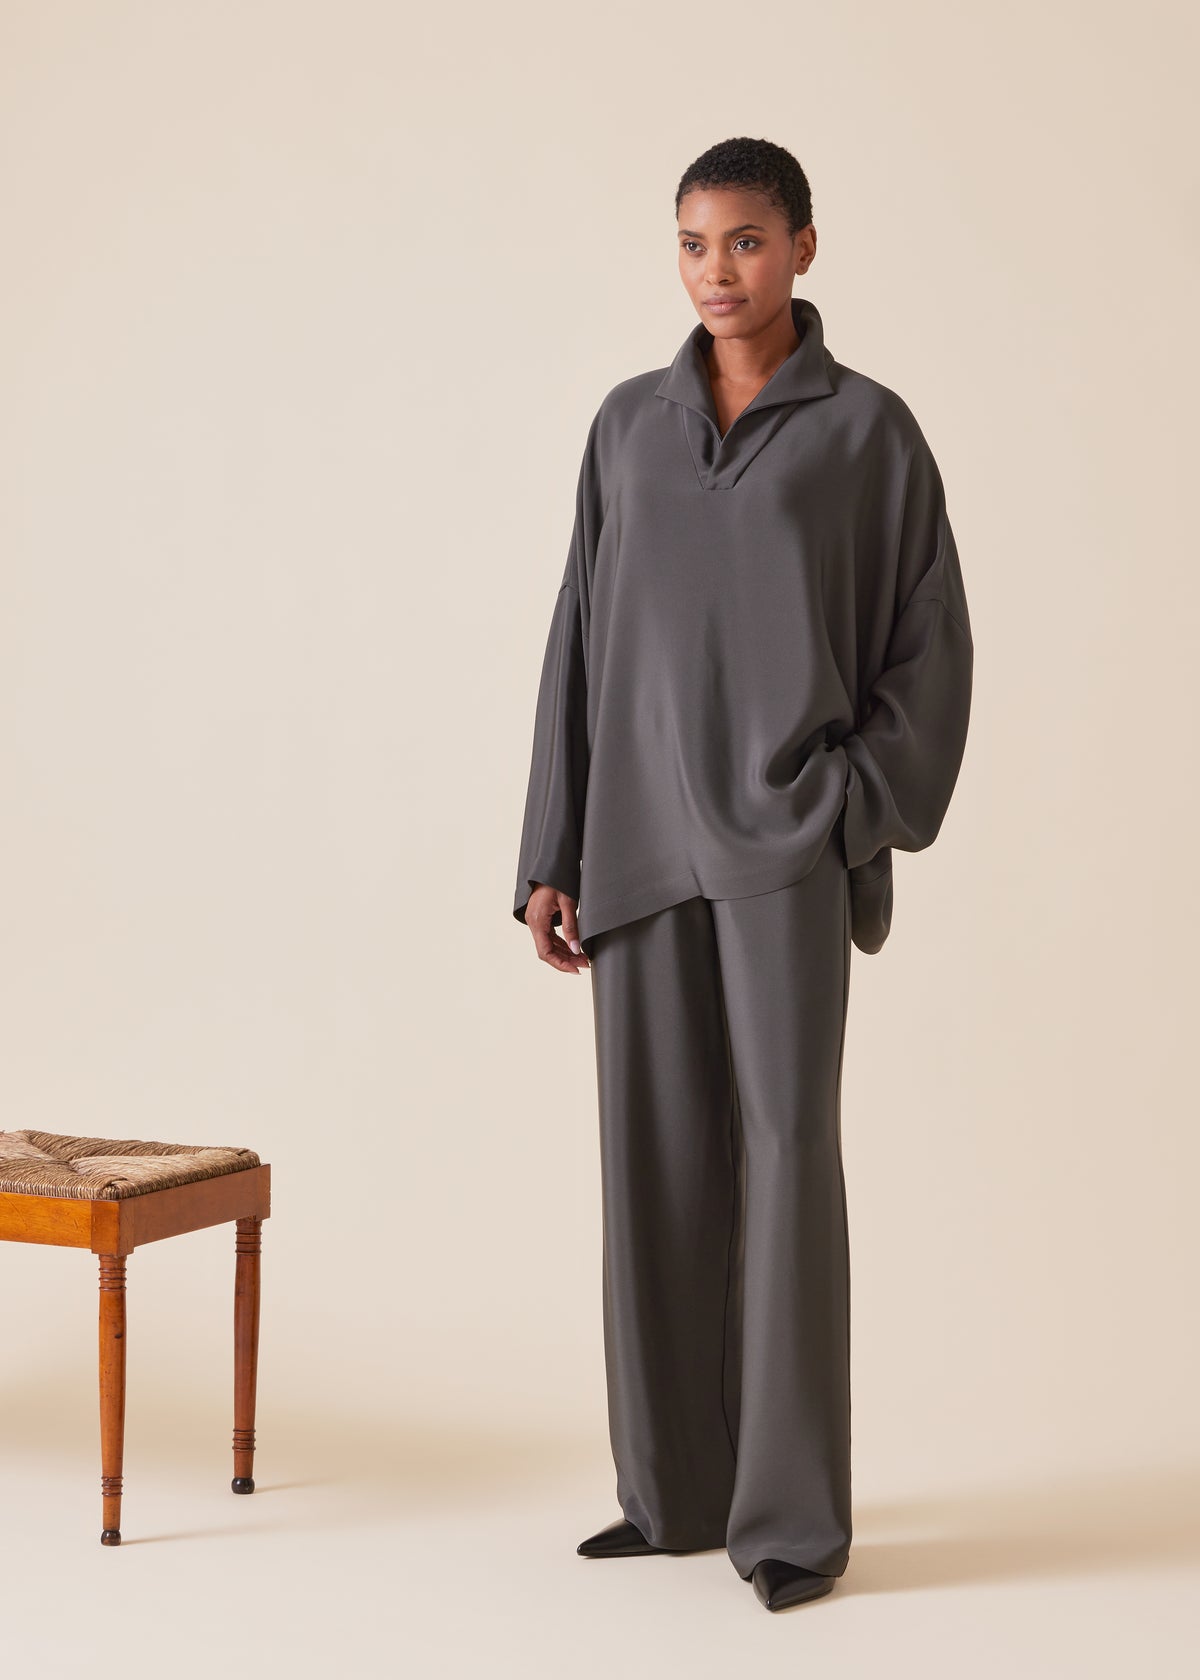 silk imperial tunic with open stand collar - mid plus